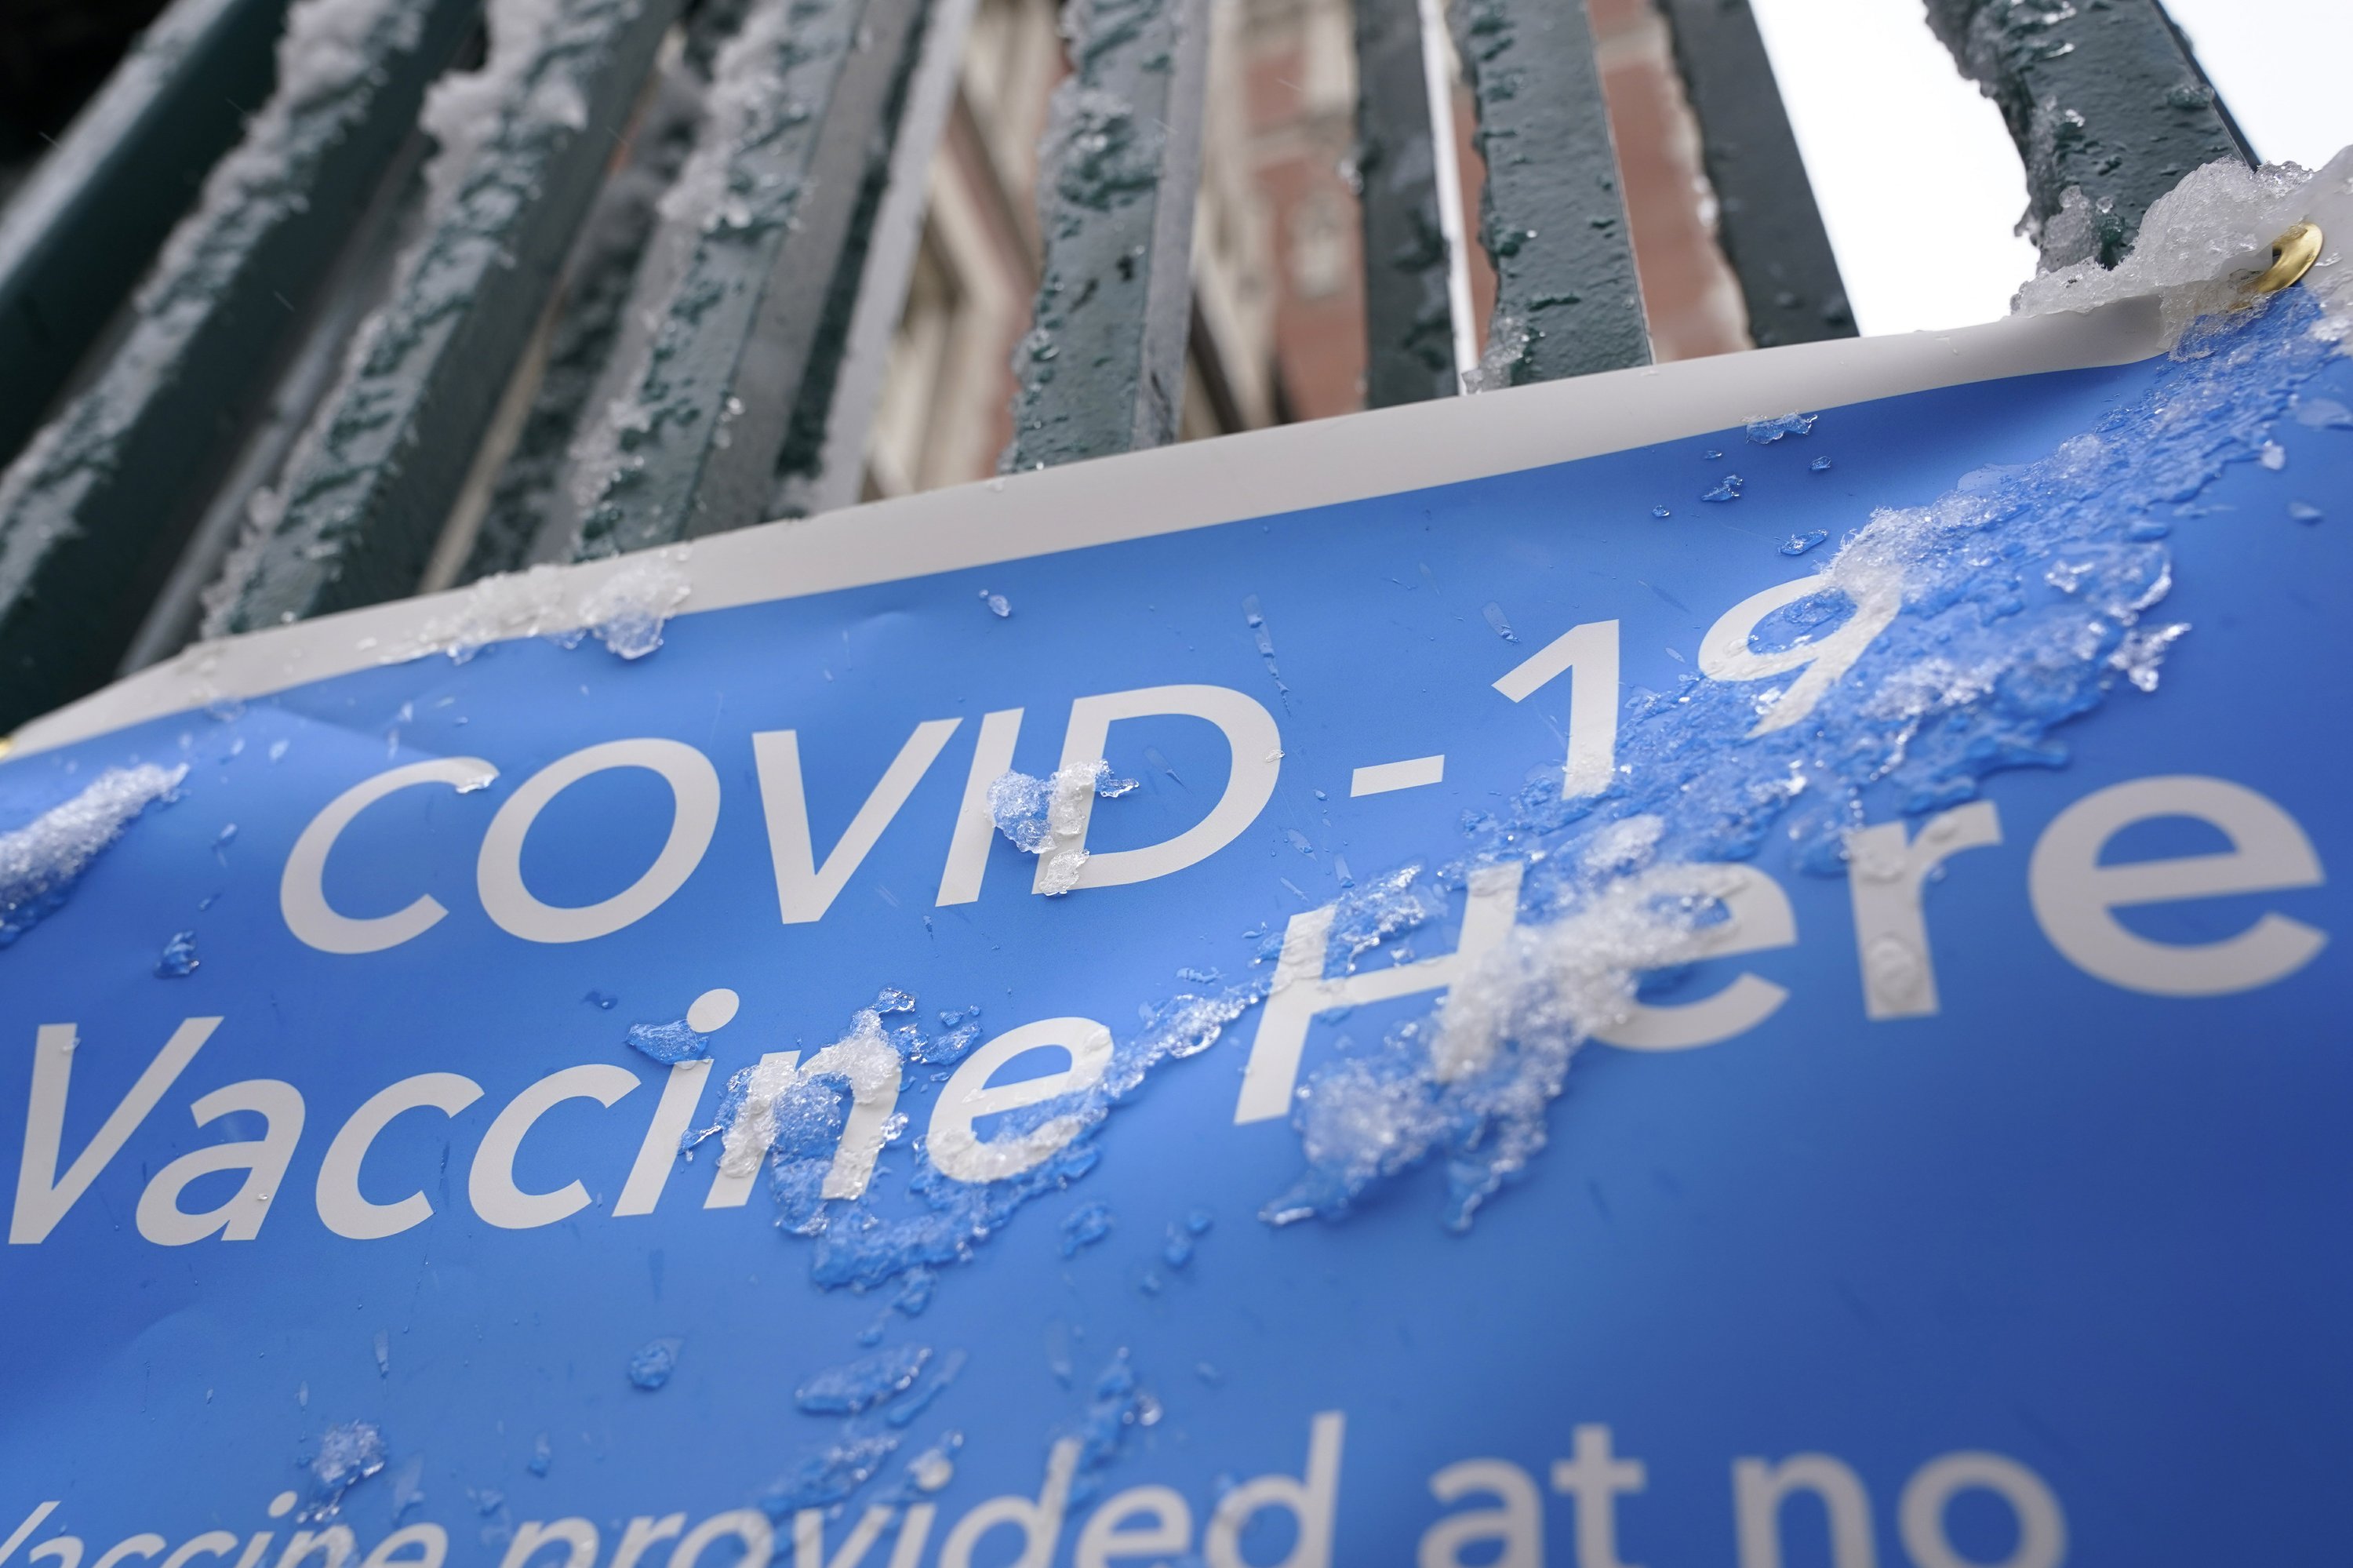 Vaccinations resume as non-historic snowstorm disappears